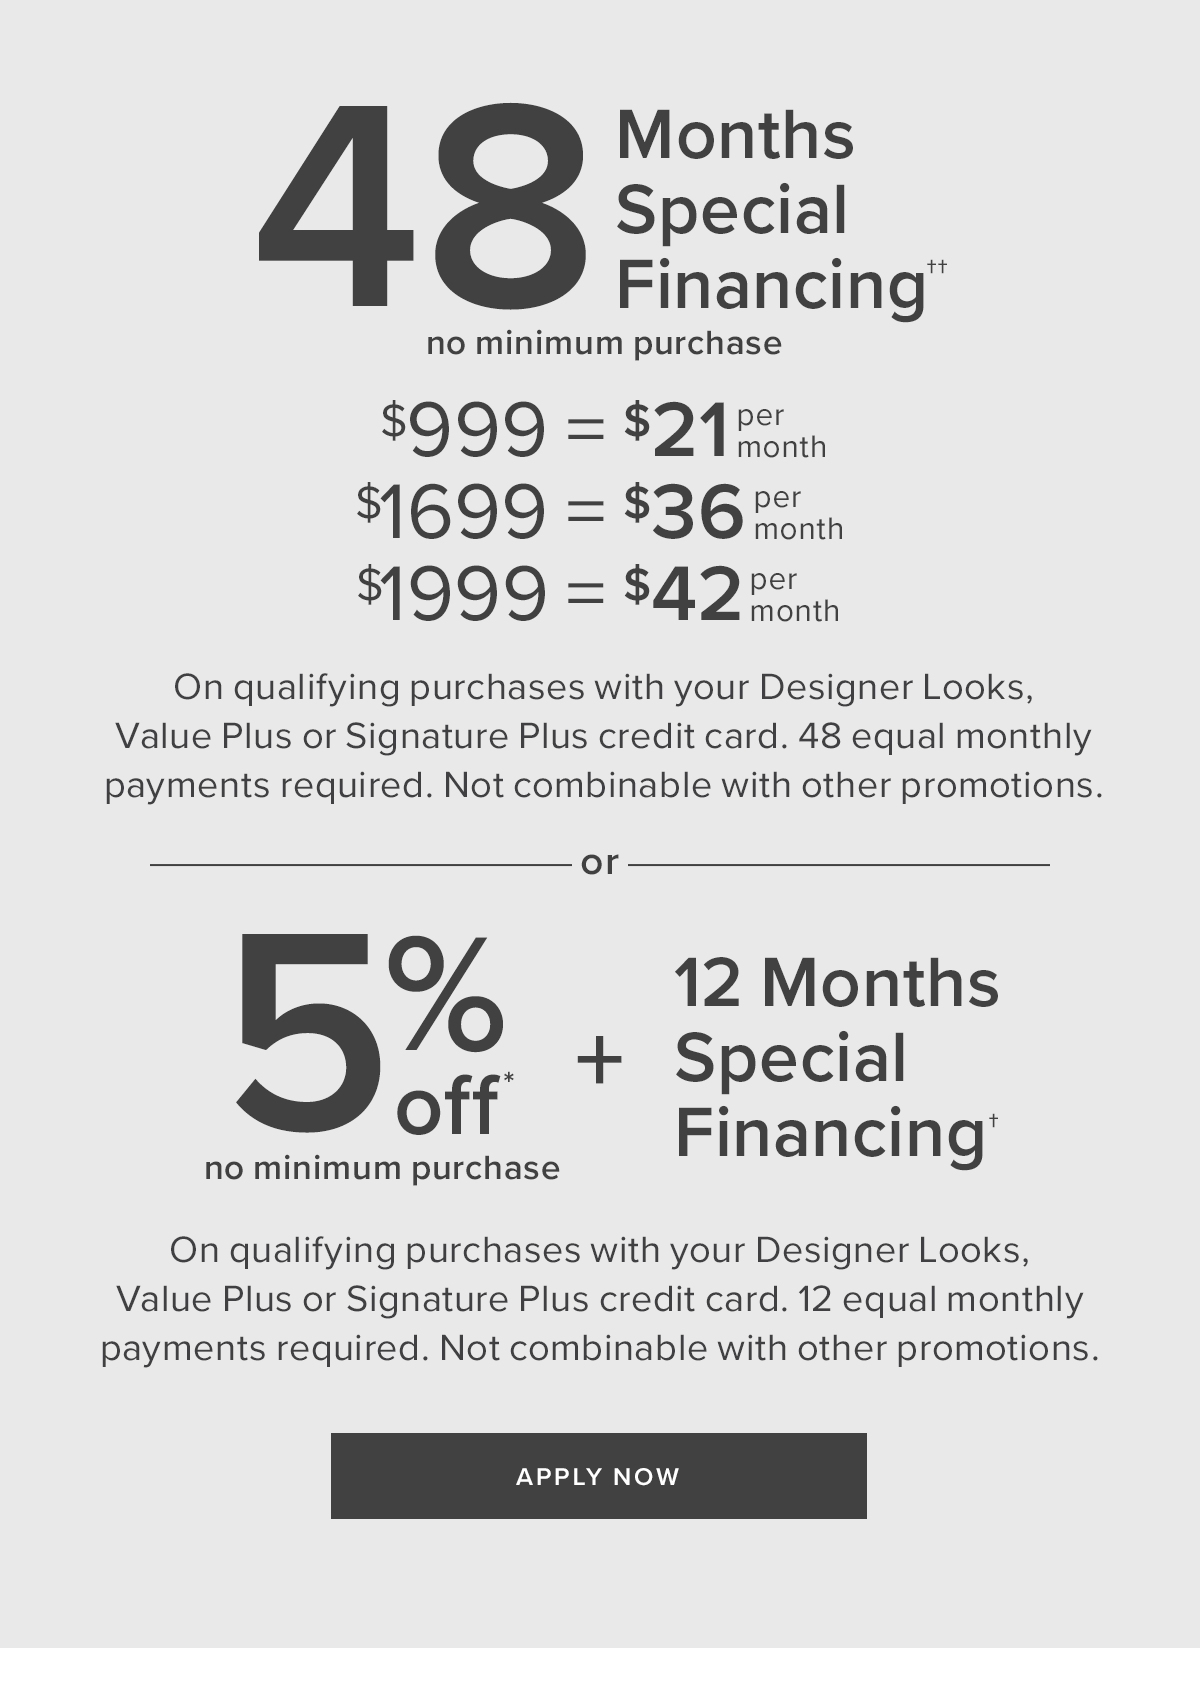 48 Months Special Financing or 5% Off + 12 Months Special Financing